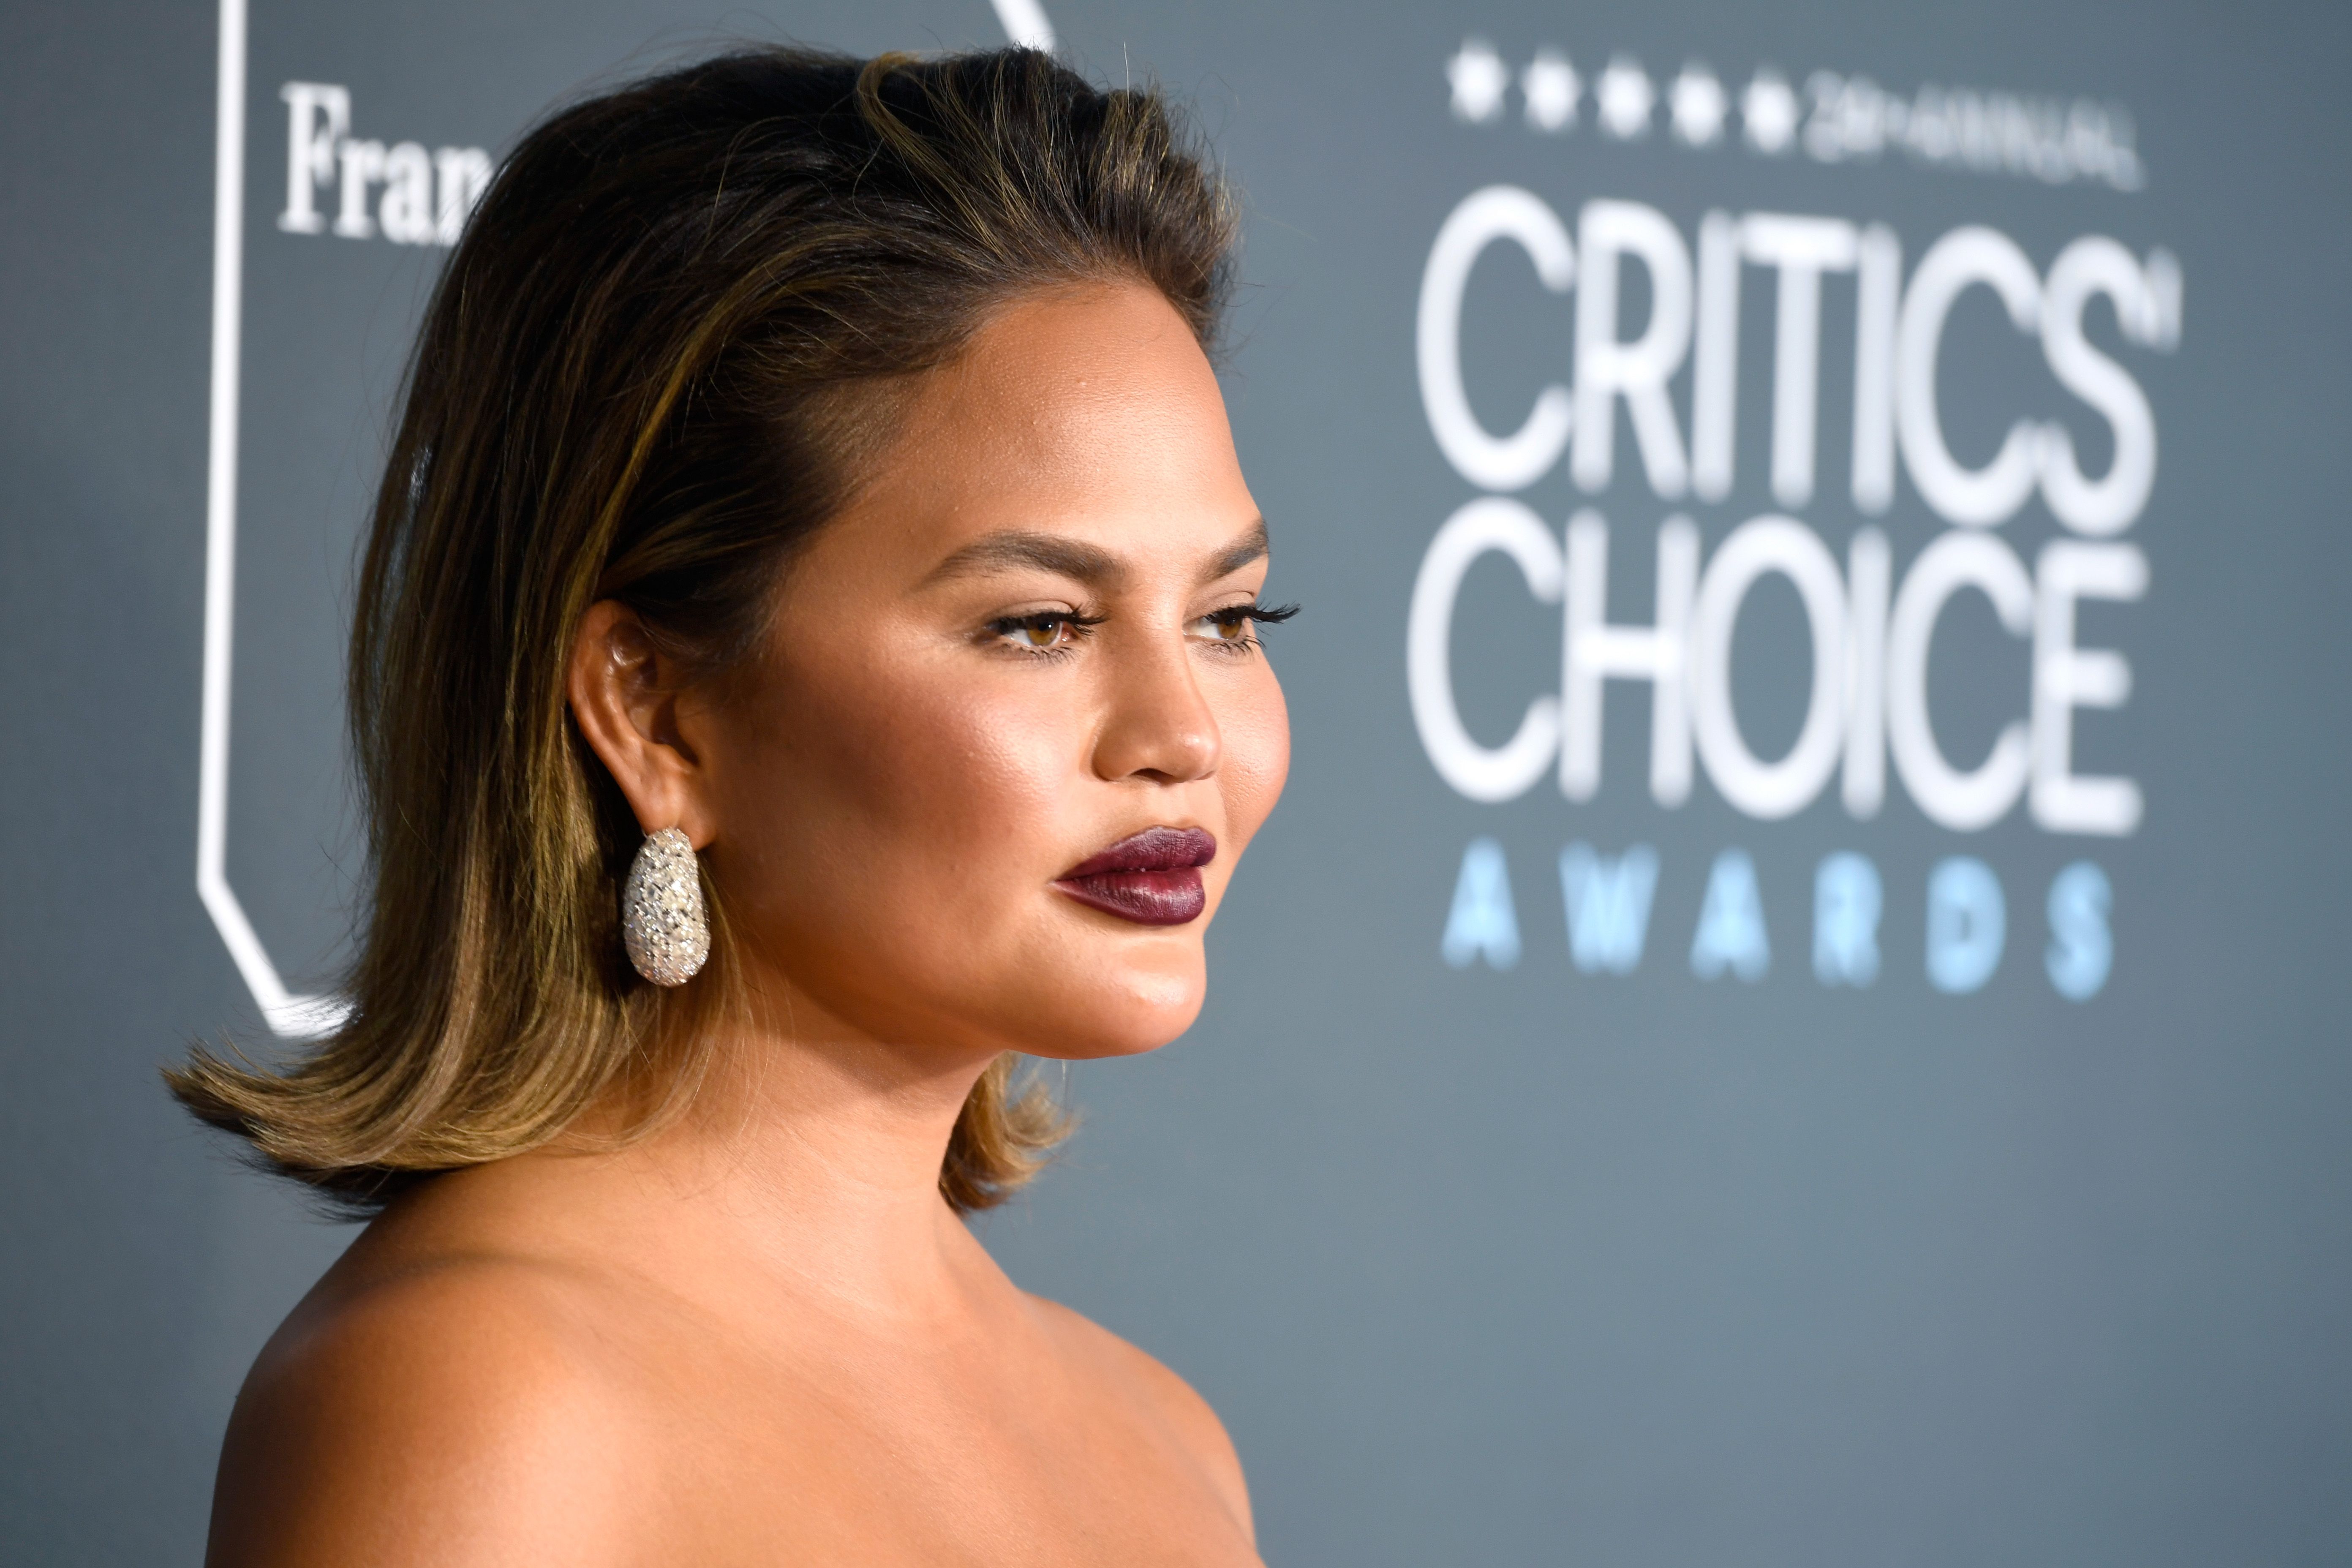 Chrissy Teigen Documents Her Recovery After Endometriosis Surgery